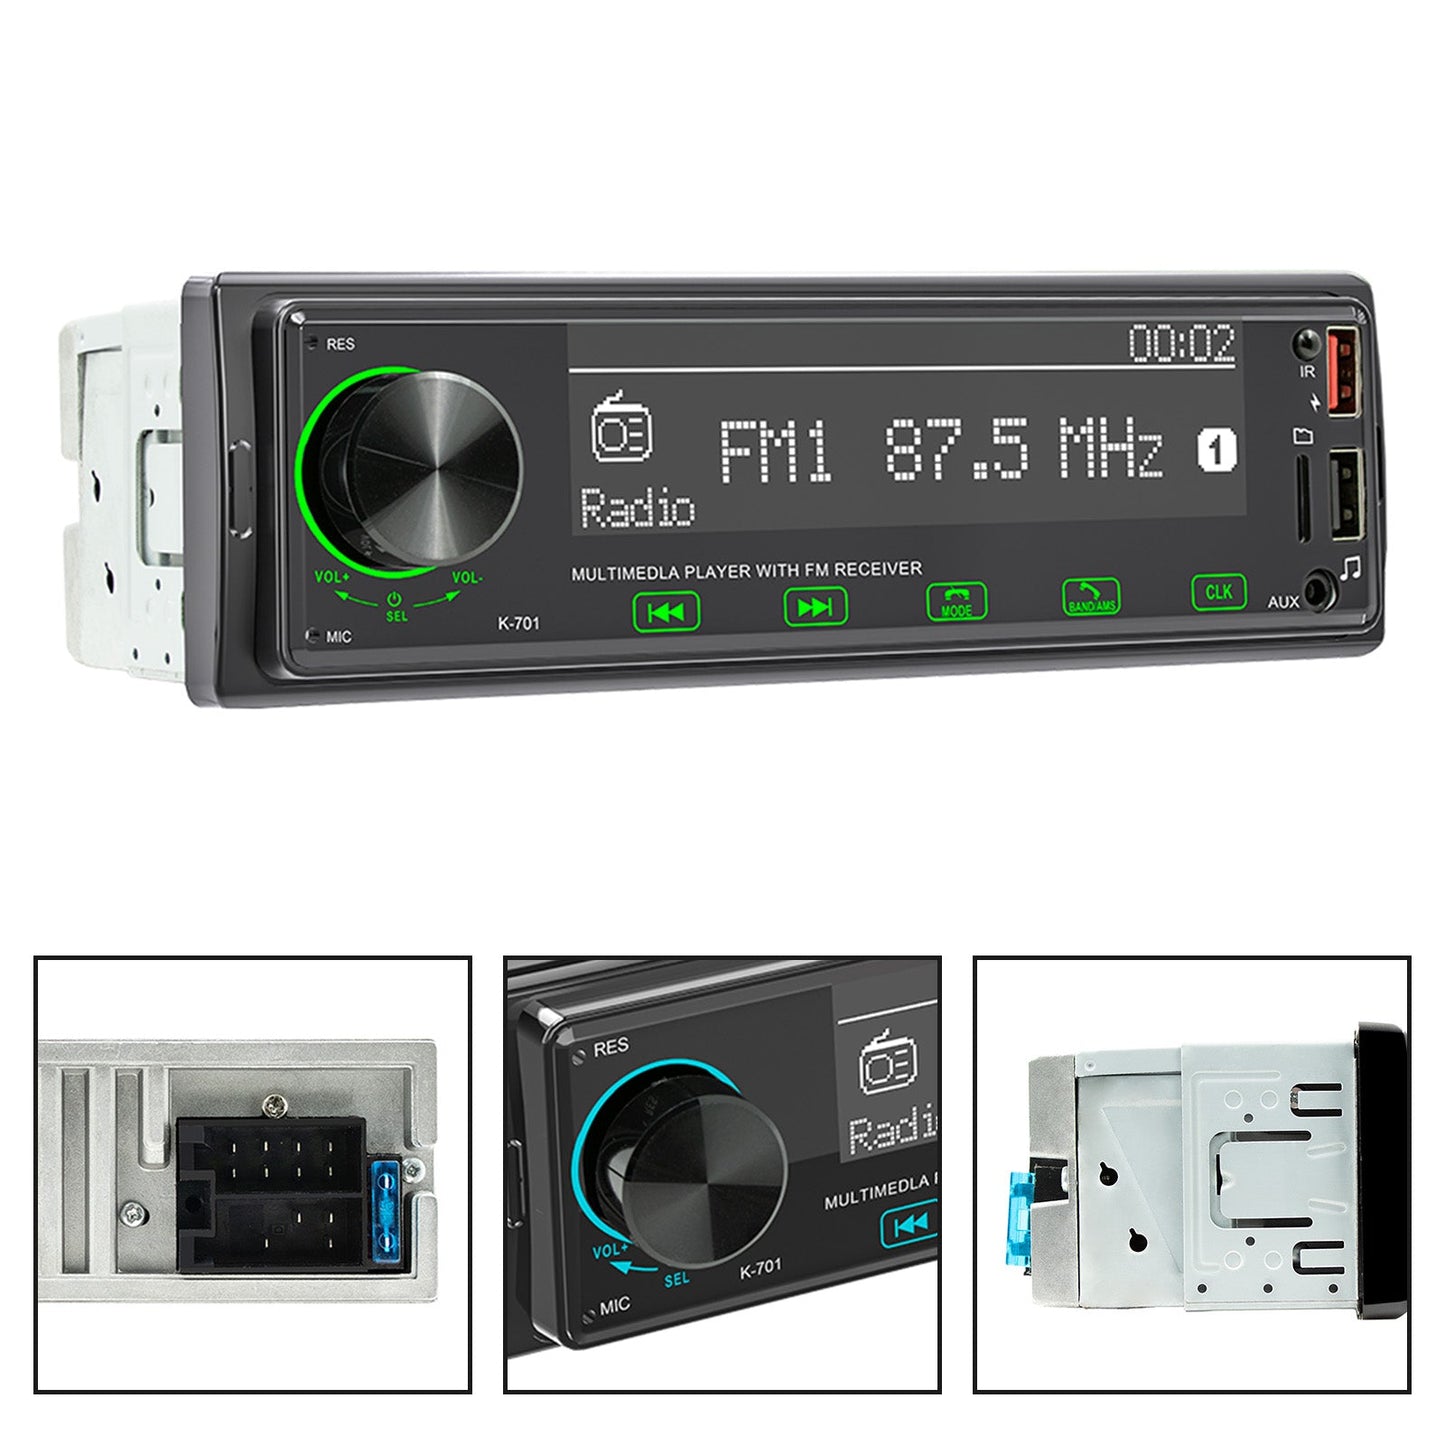 2.5D touch screen 1DIN Bluetooth Stereo Radio FM Car MP3 Player with DAB